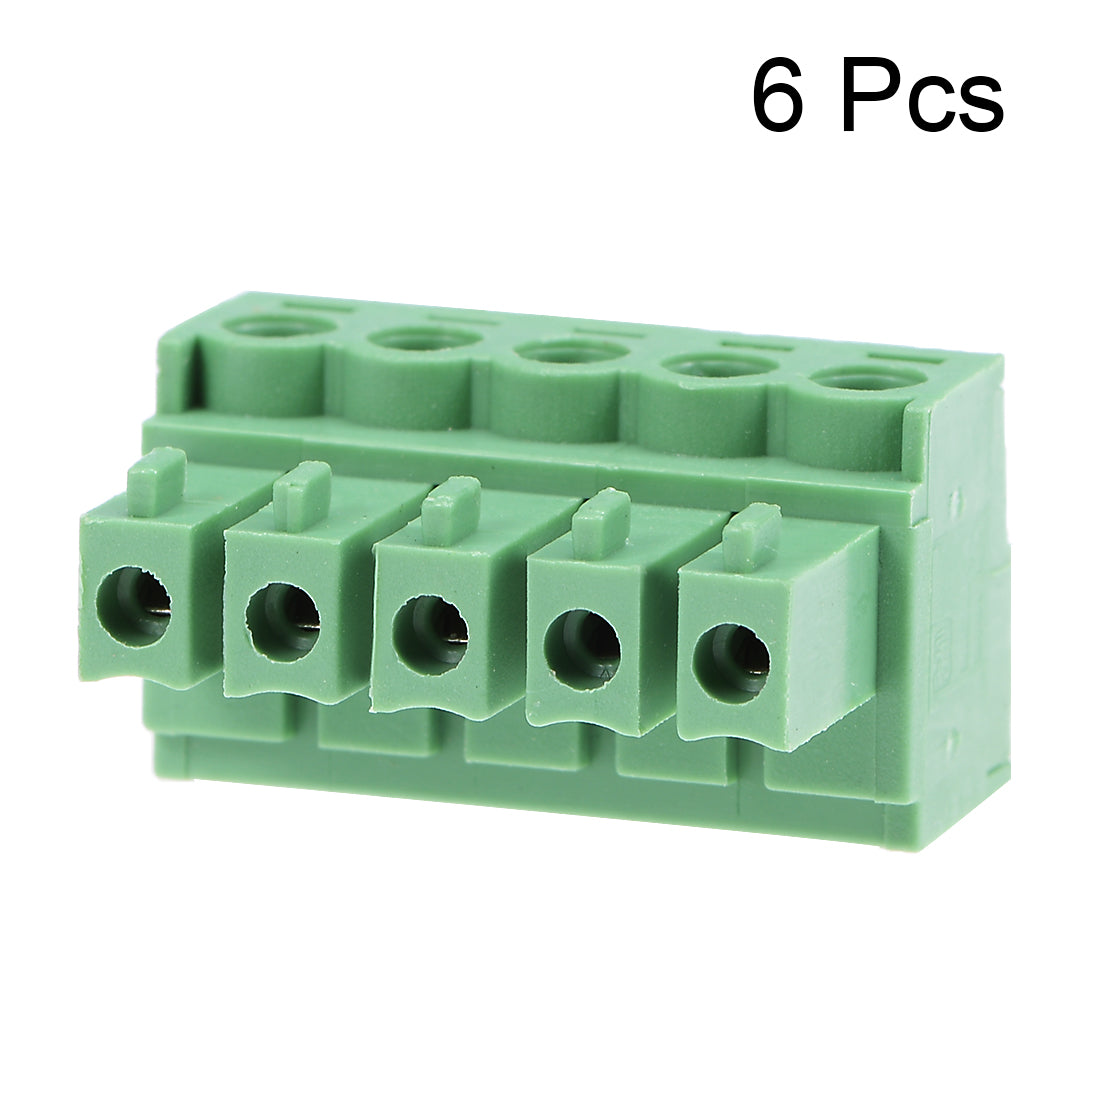 uxcell Uxcell 6Pcs AC300V 8A 3.81mm Pitch 5P Needle Seat Insert-In PCB Terminal Block green